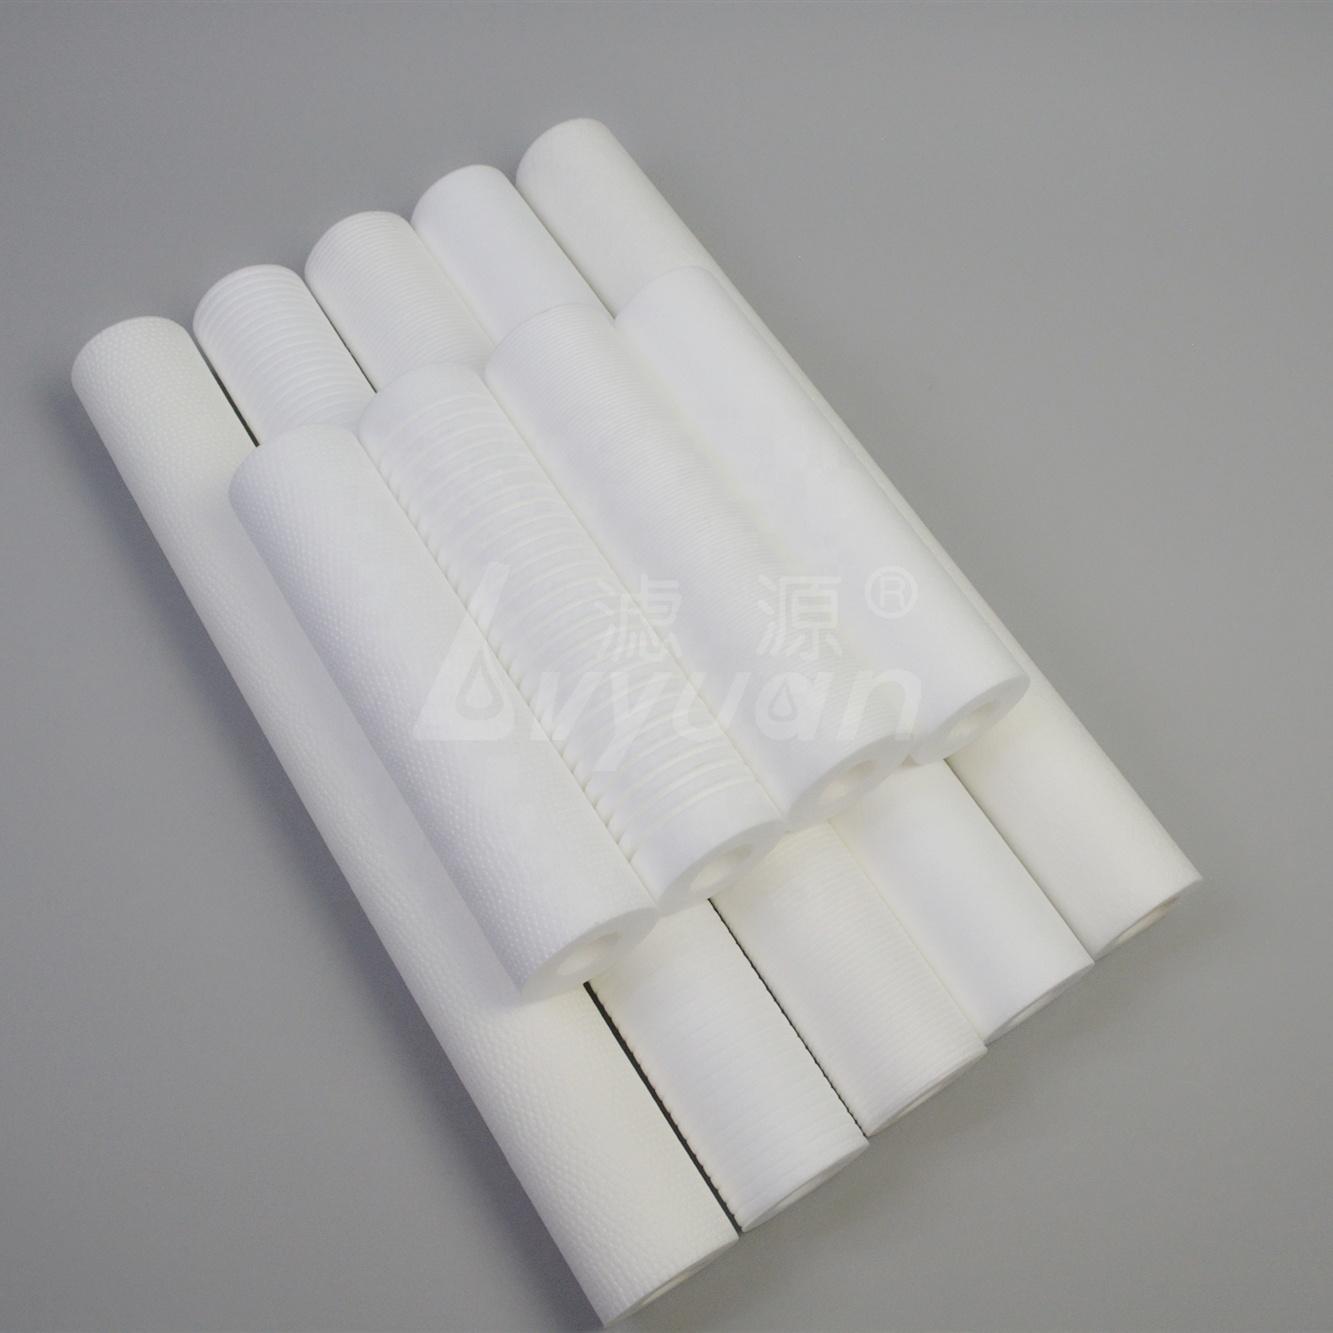 10 20 30 40 inch pp melt blown filter cartridge filter water with 1 3 5 micron